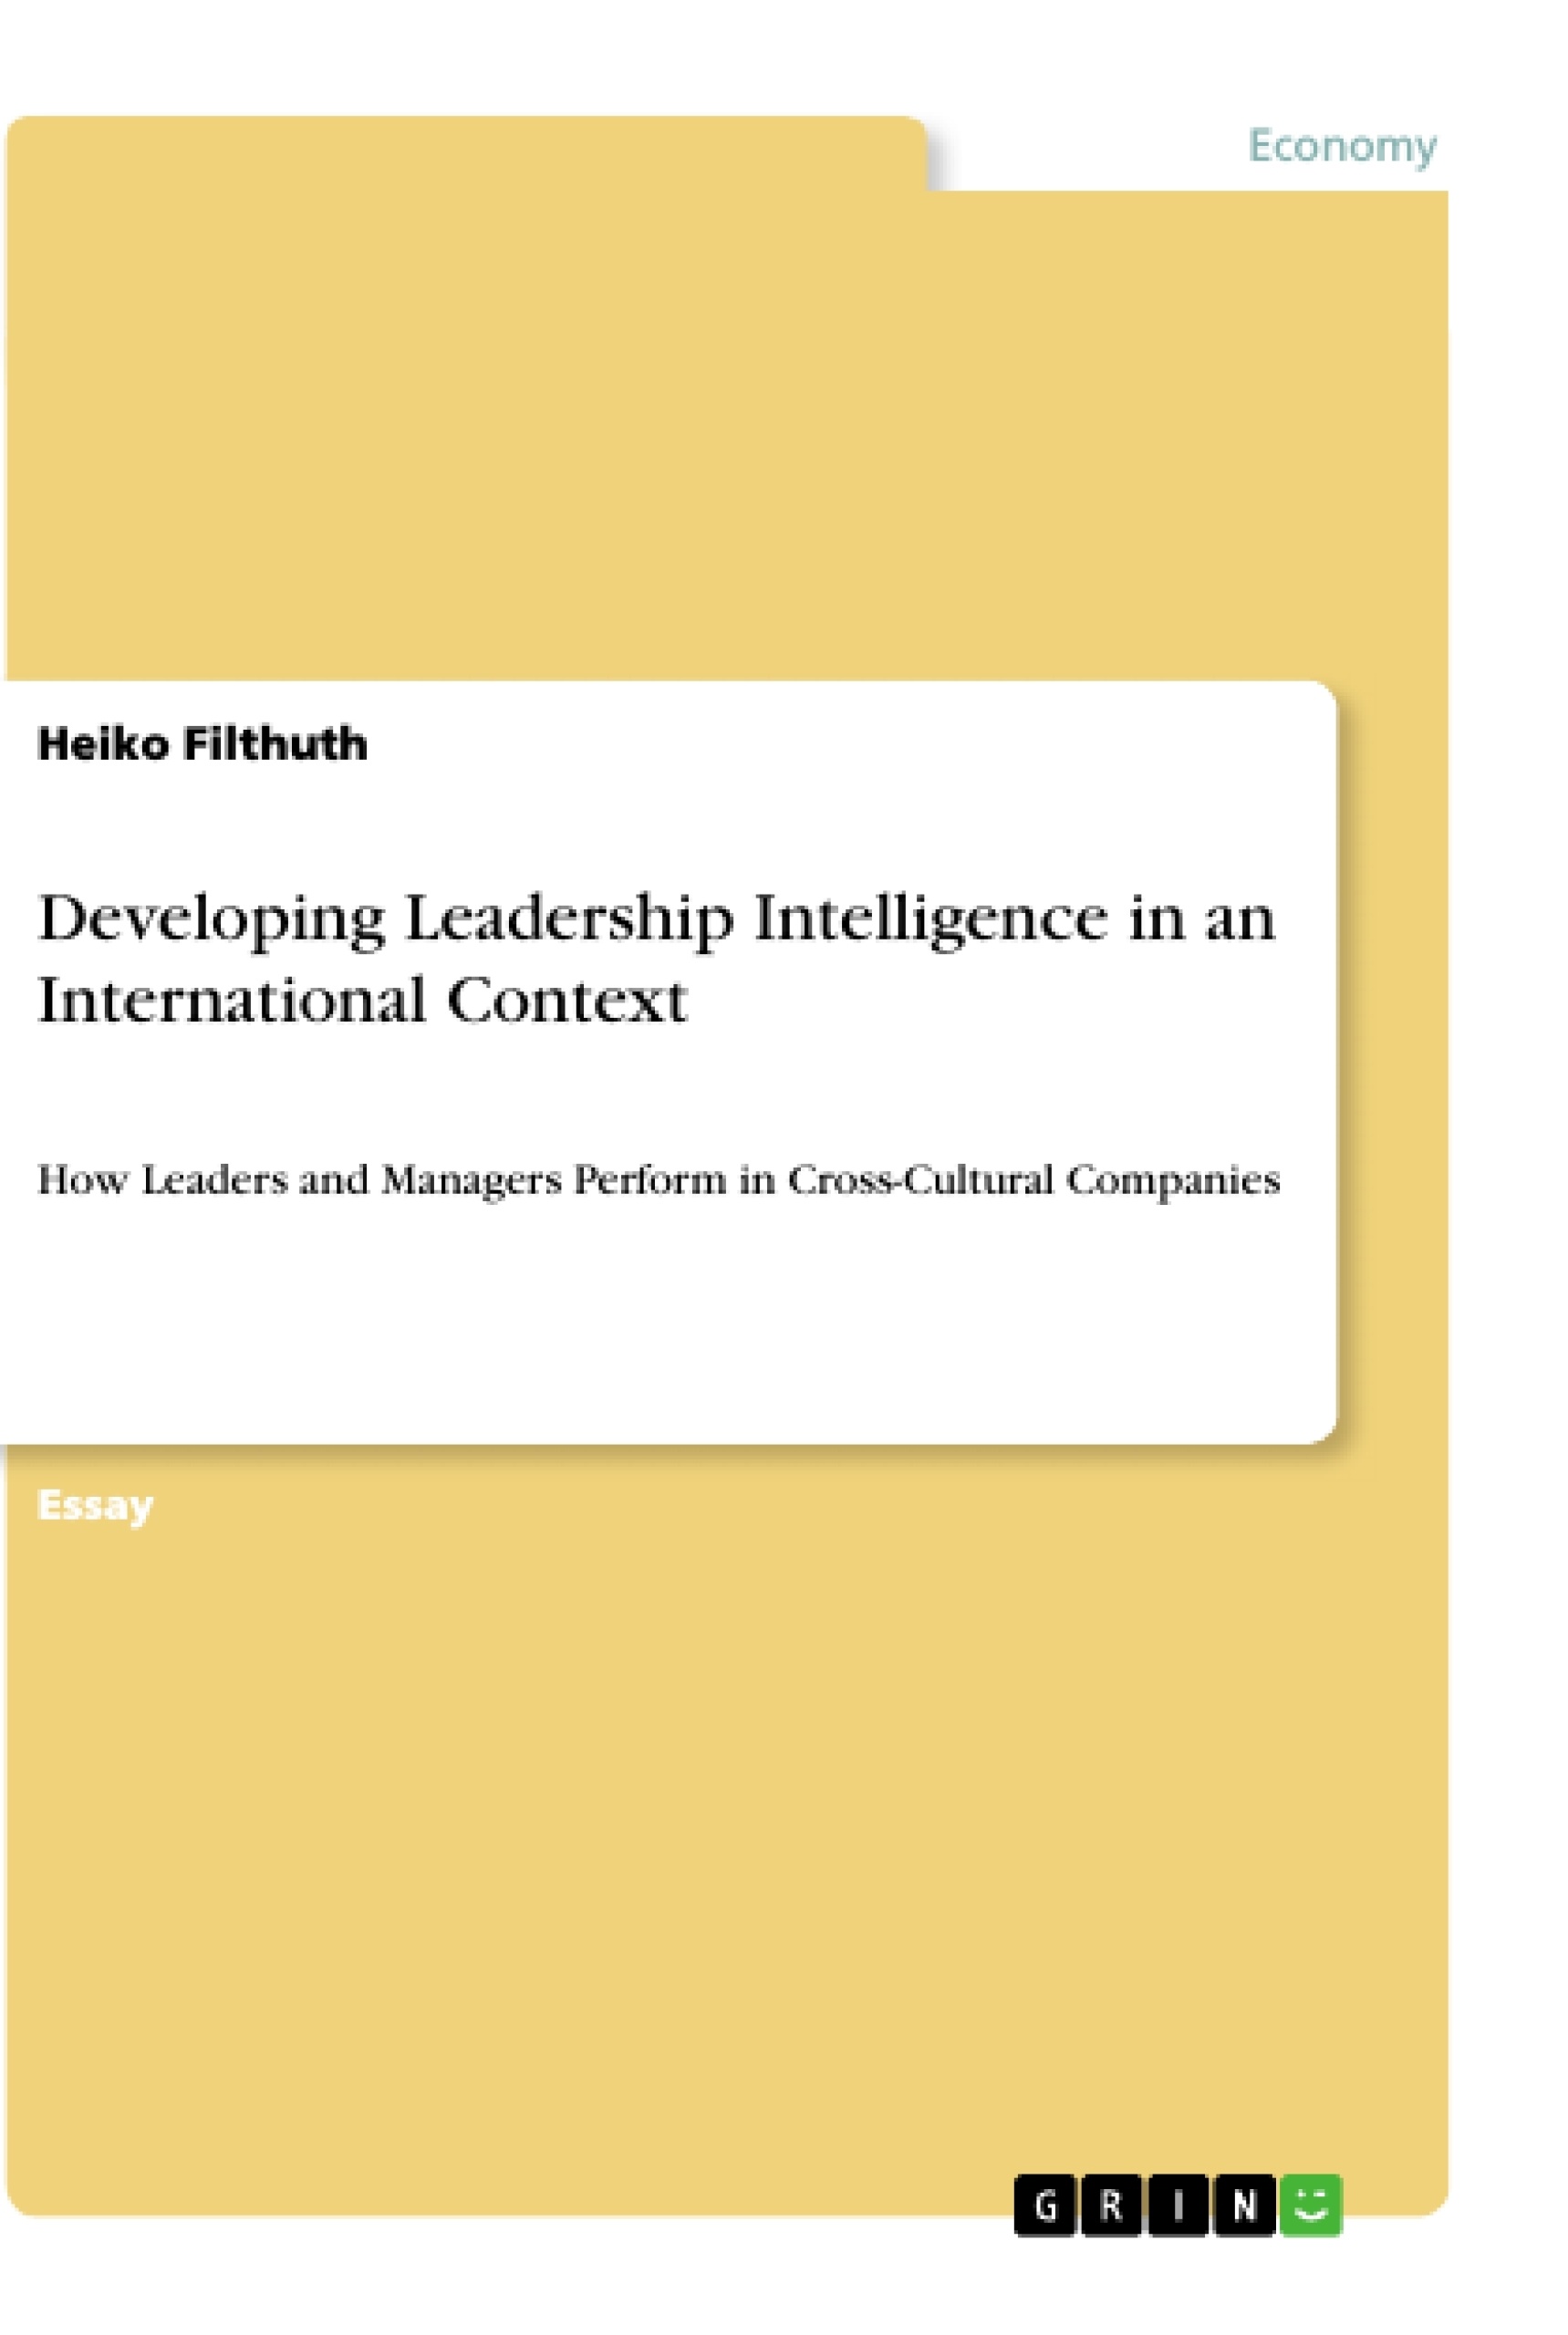 Title: Developing Leadership Intelligence in an International Context